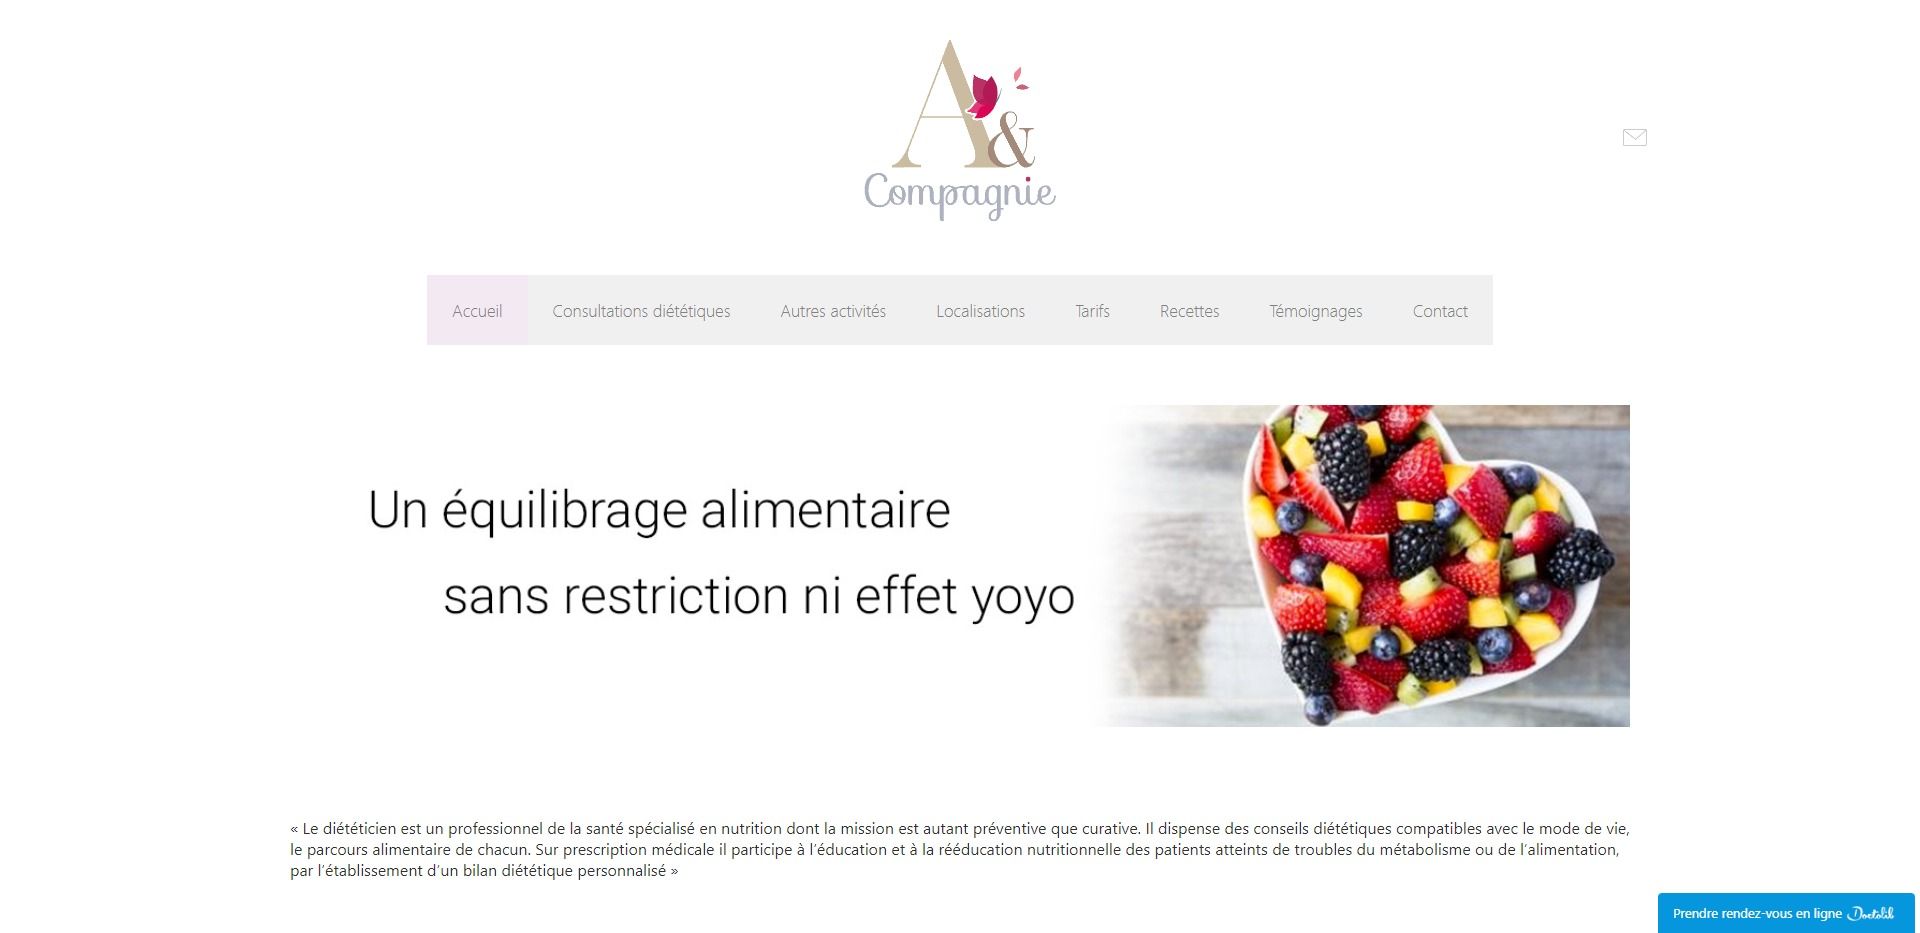 Image site A&compagnie